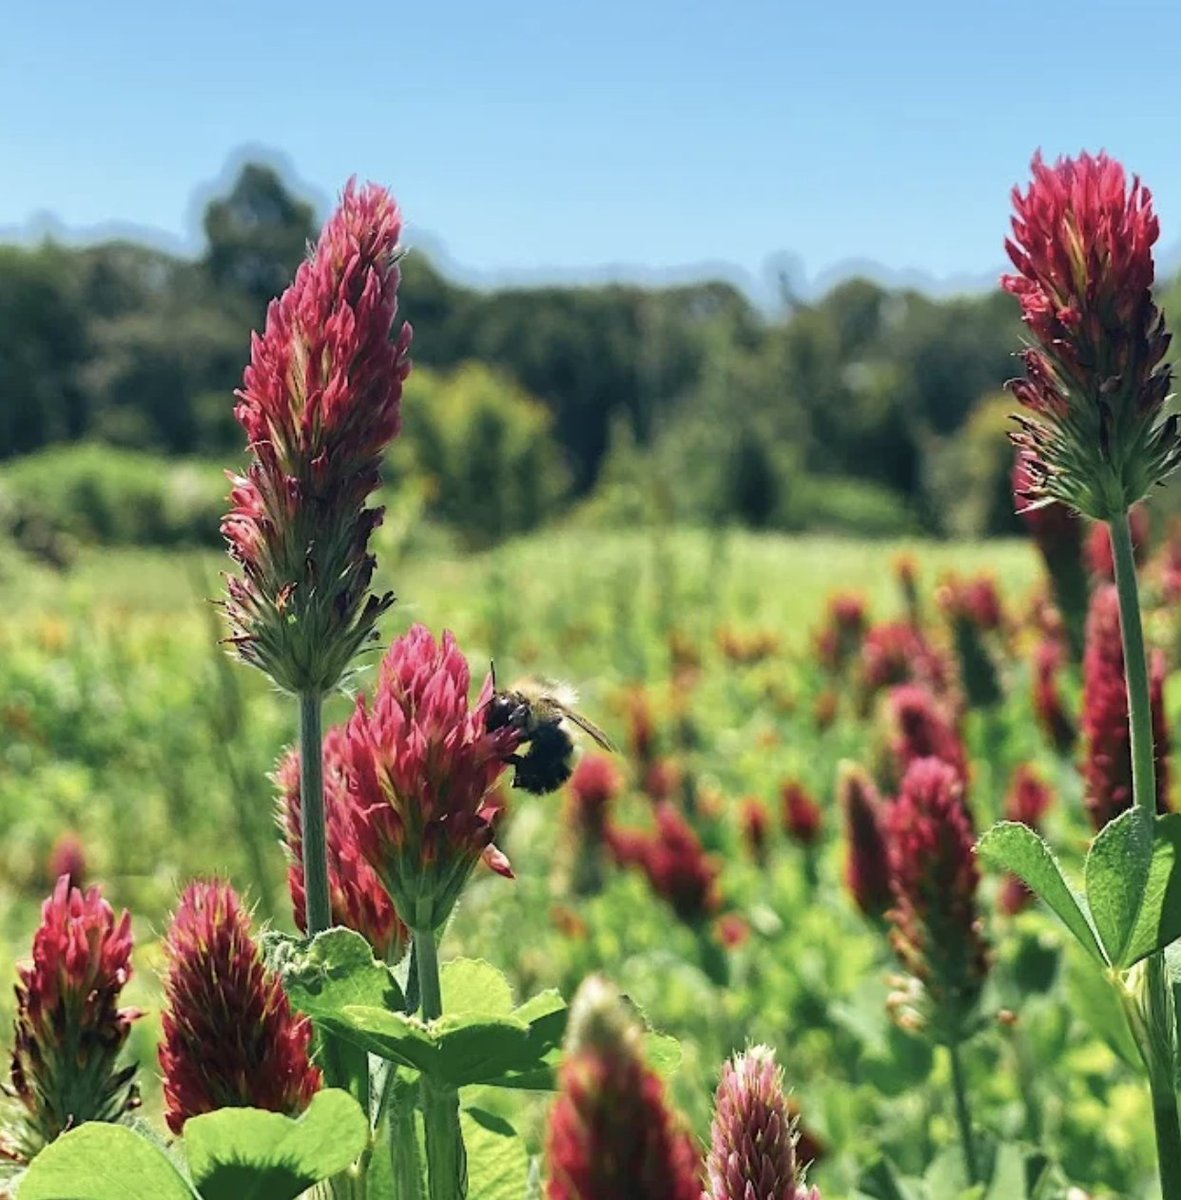 Join us TOMORROW for our Pollinators in the Garden workshop courtesy of the @urimastergardeners. Be ready to learn about what native plants will attract bees and other pollinators to your garden! events.uri.edu/event/pollinat…